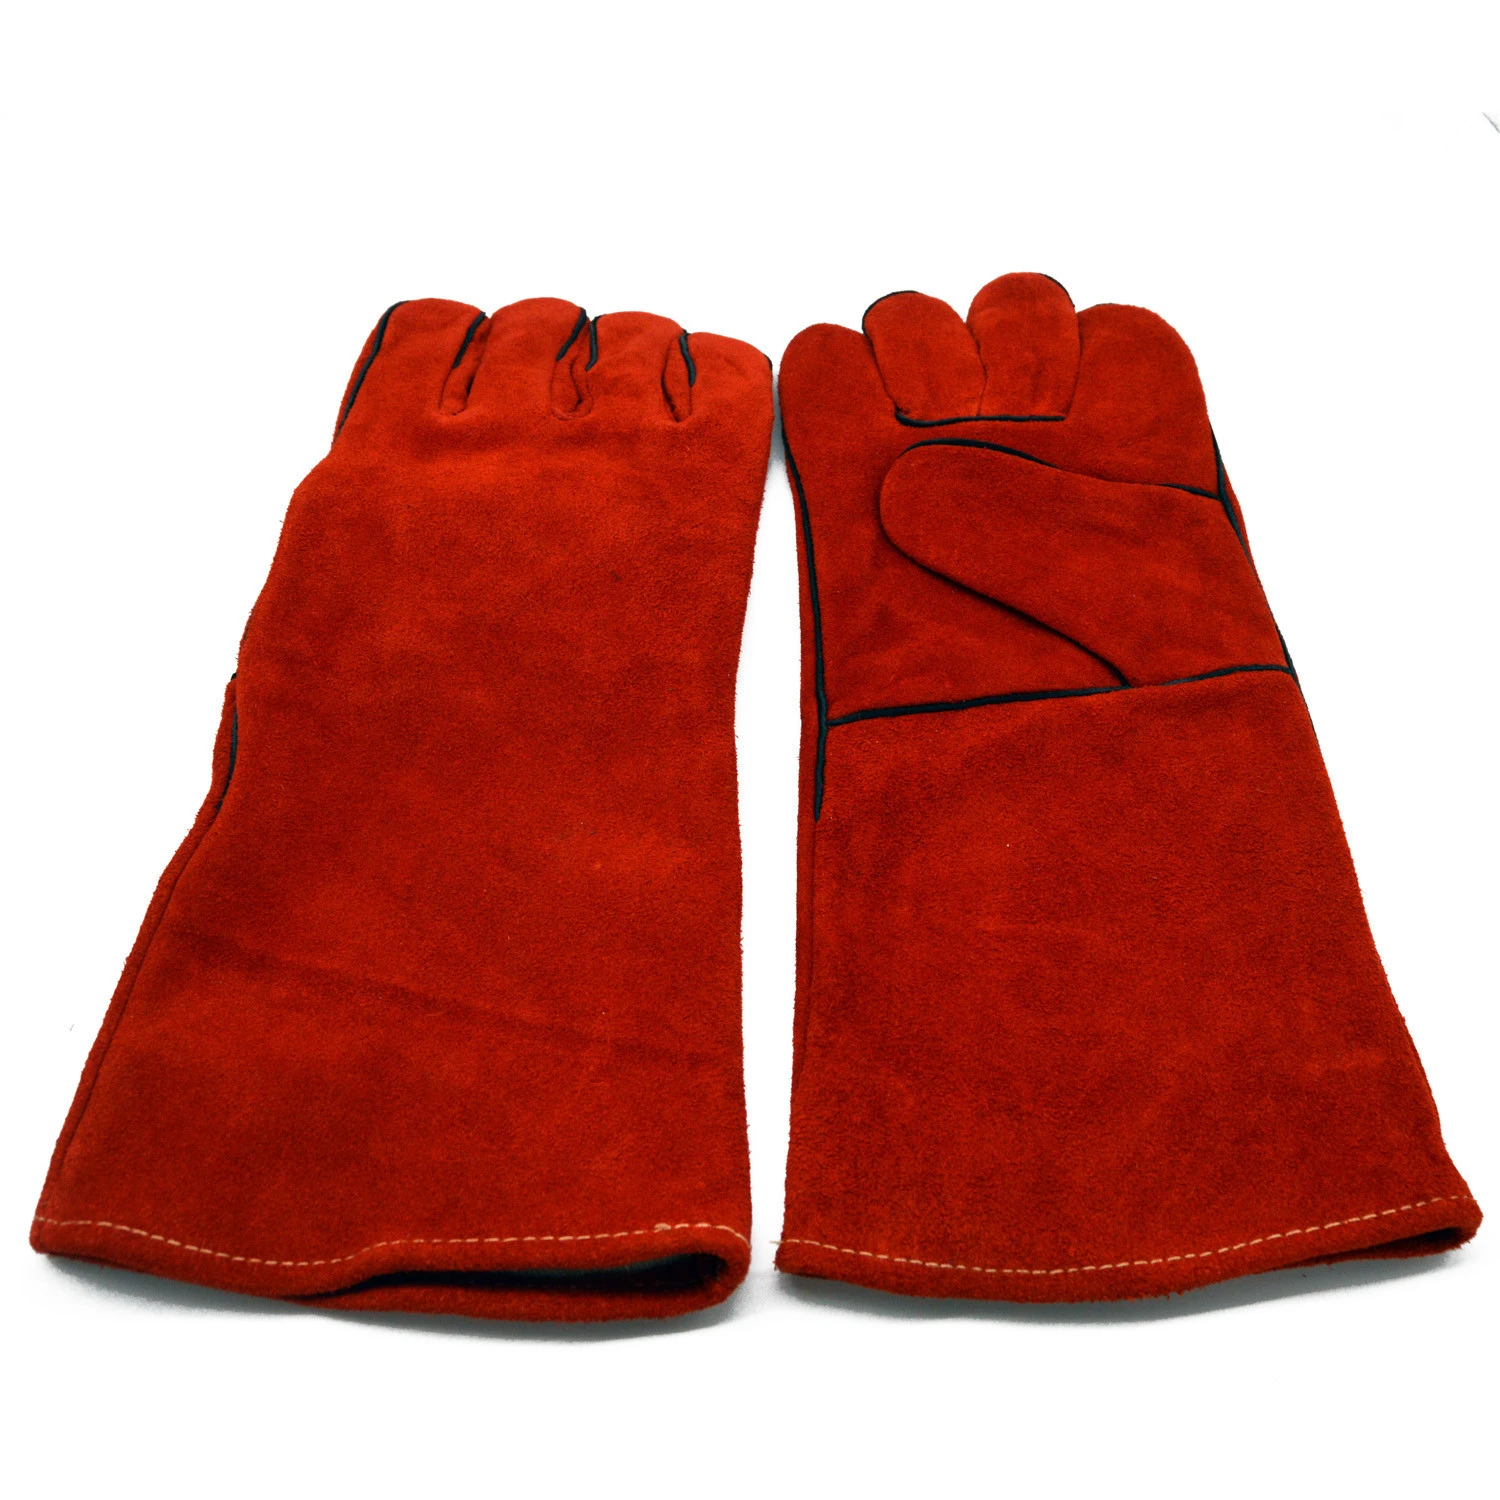 Low Price Tig Welding Gloves Soft Tech Leather Safety Cowhide Welding Gloves